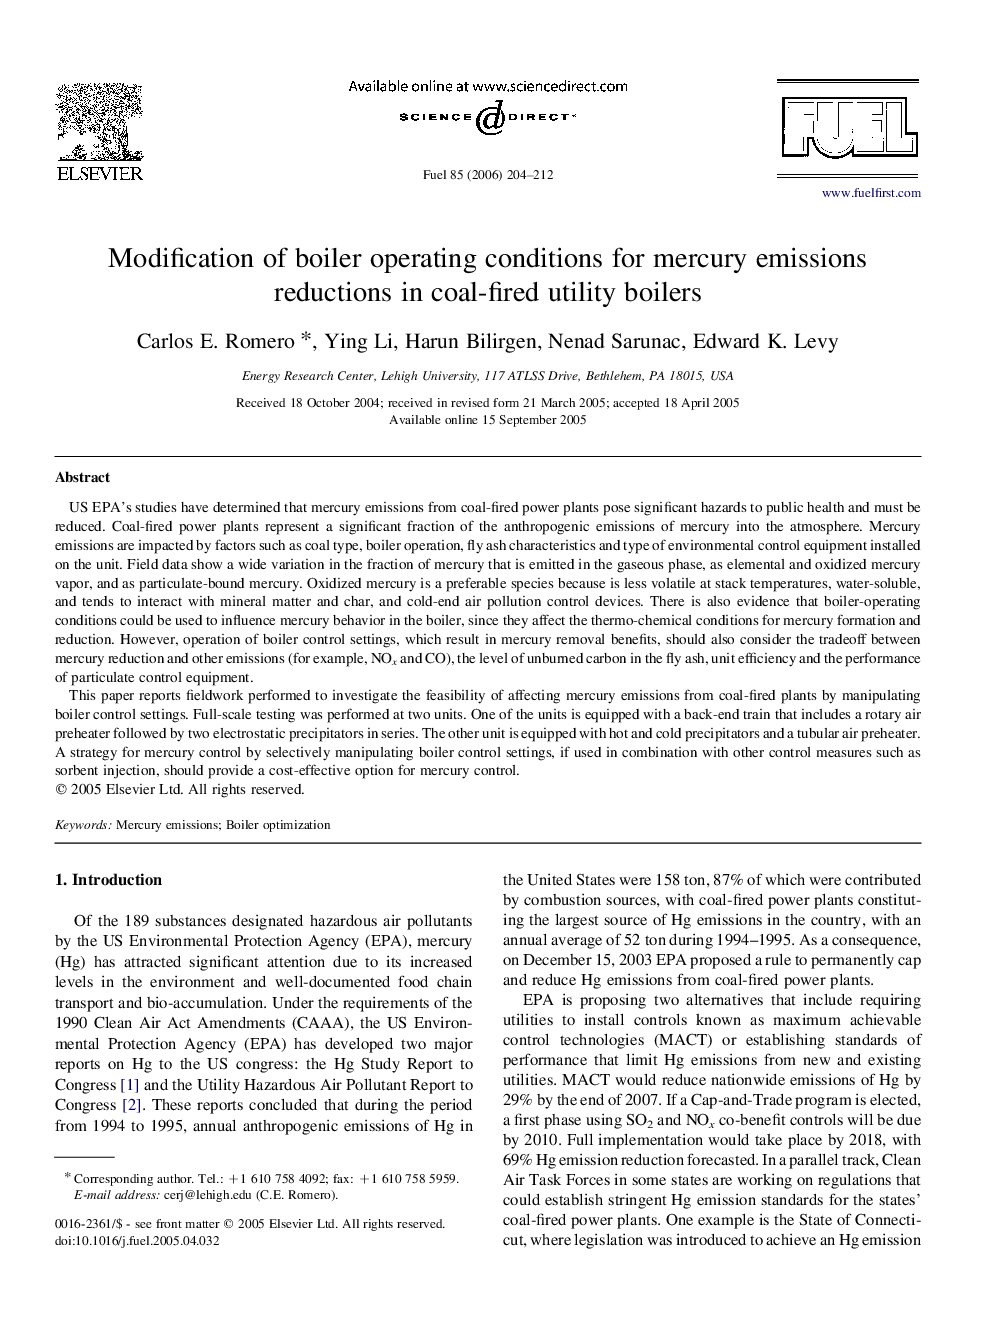 Modification of boiler operating conditions for mercury emissions reductions in coal-fired utility boilers